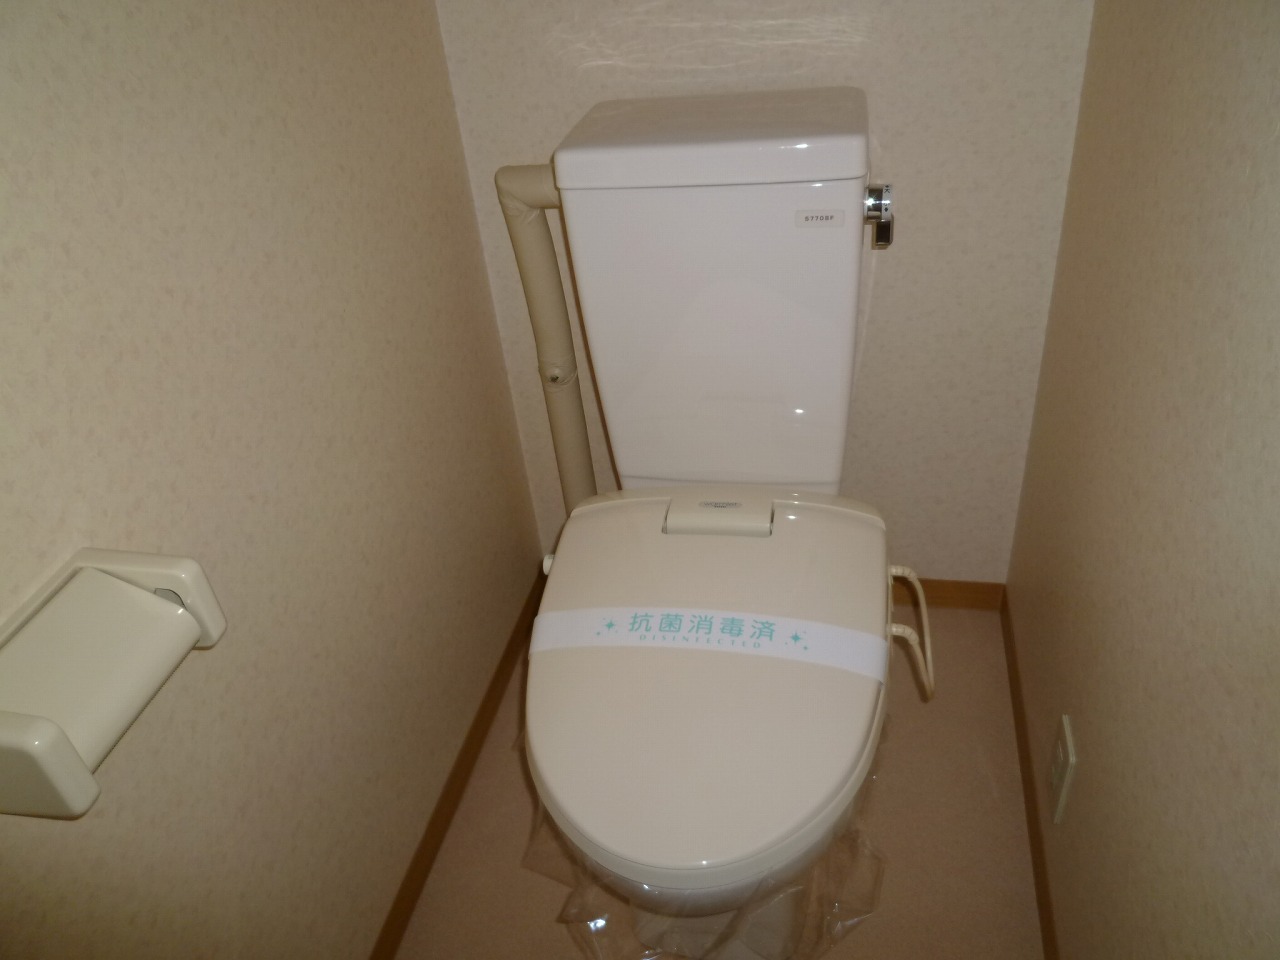 Toilet. The same type of room (No. 301 room)